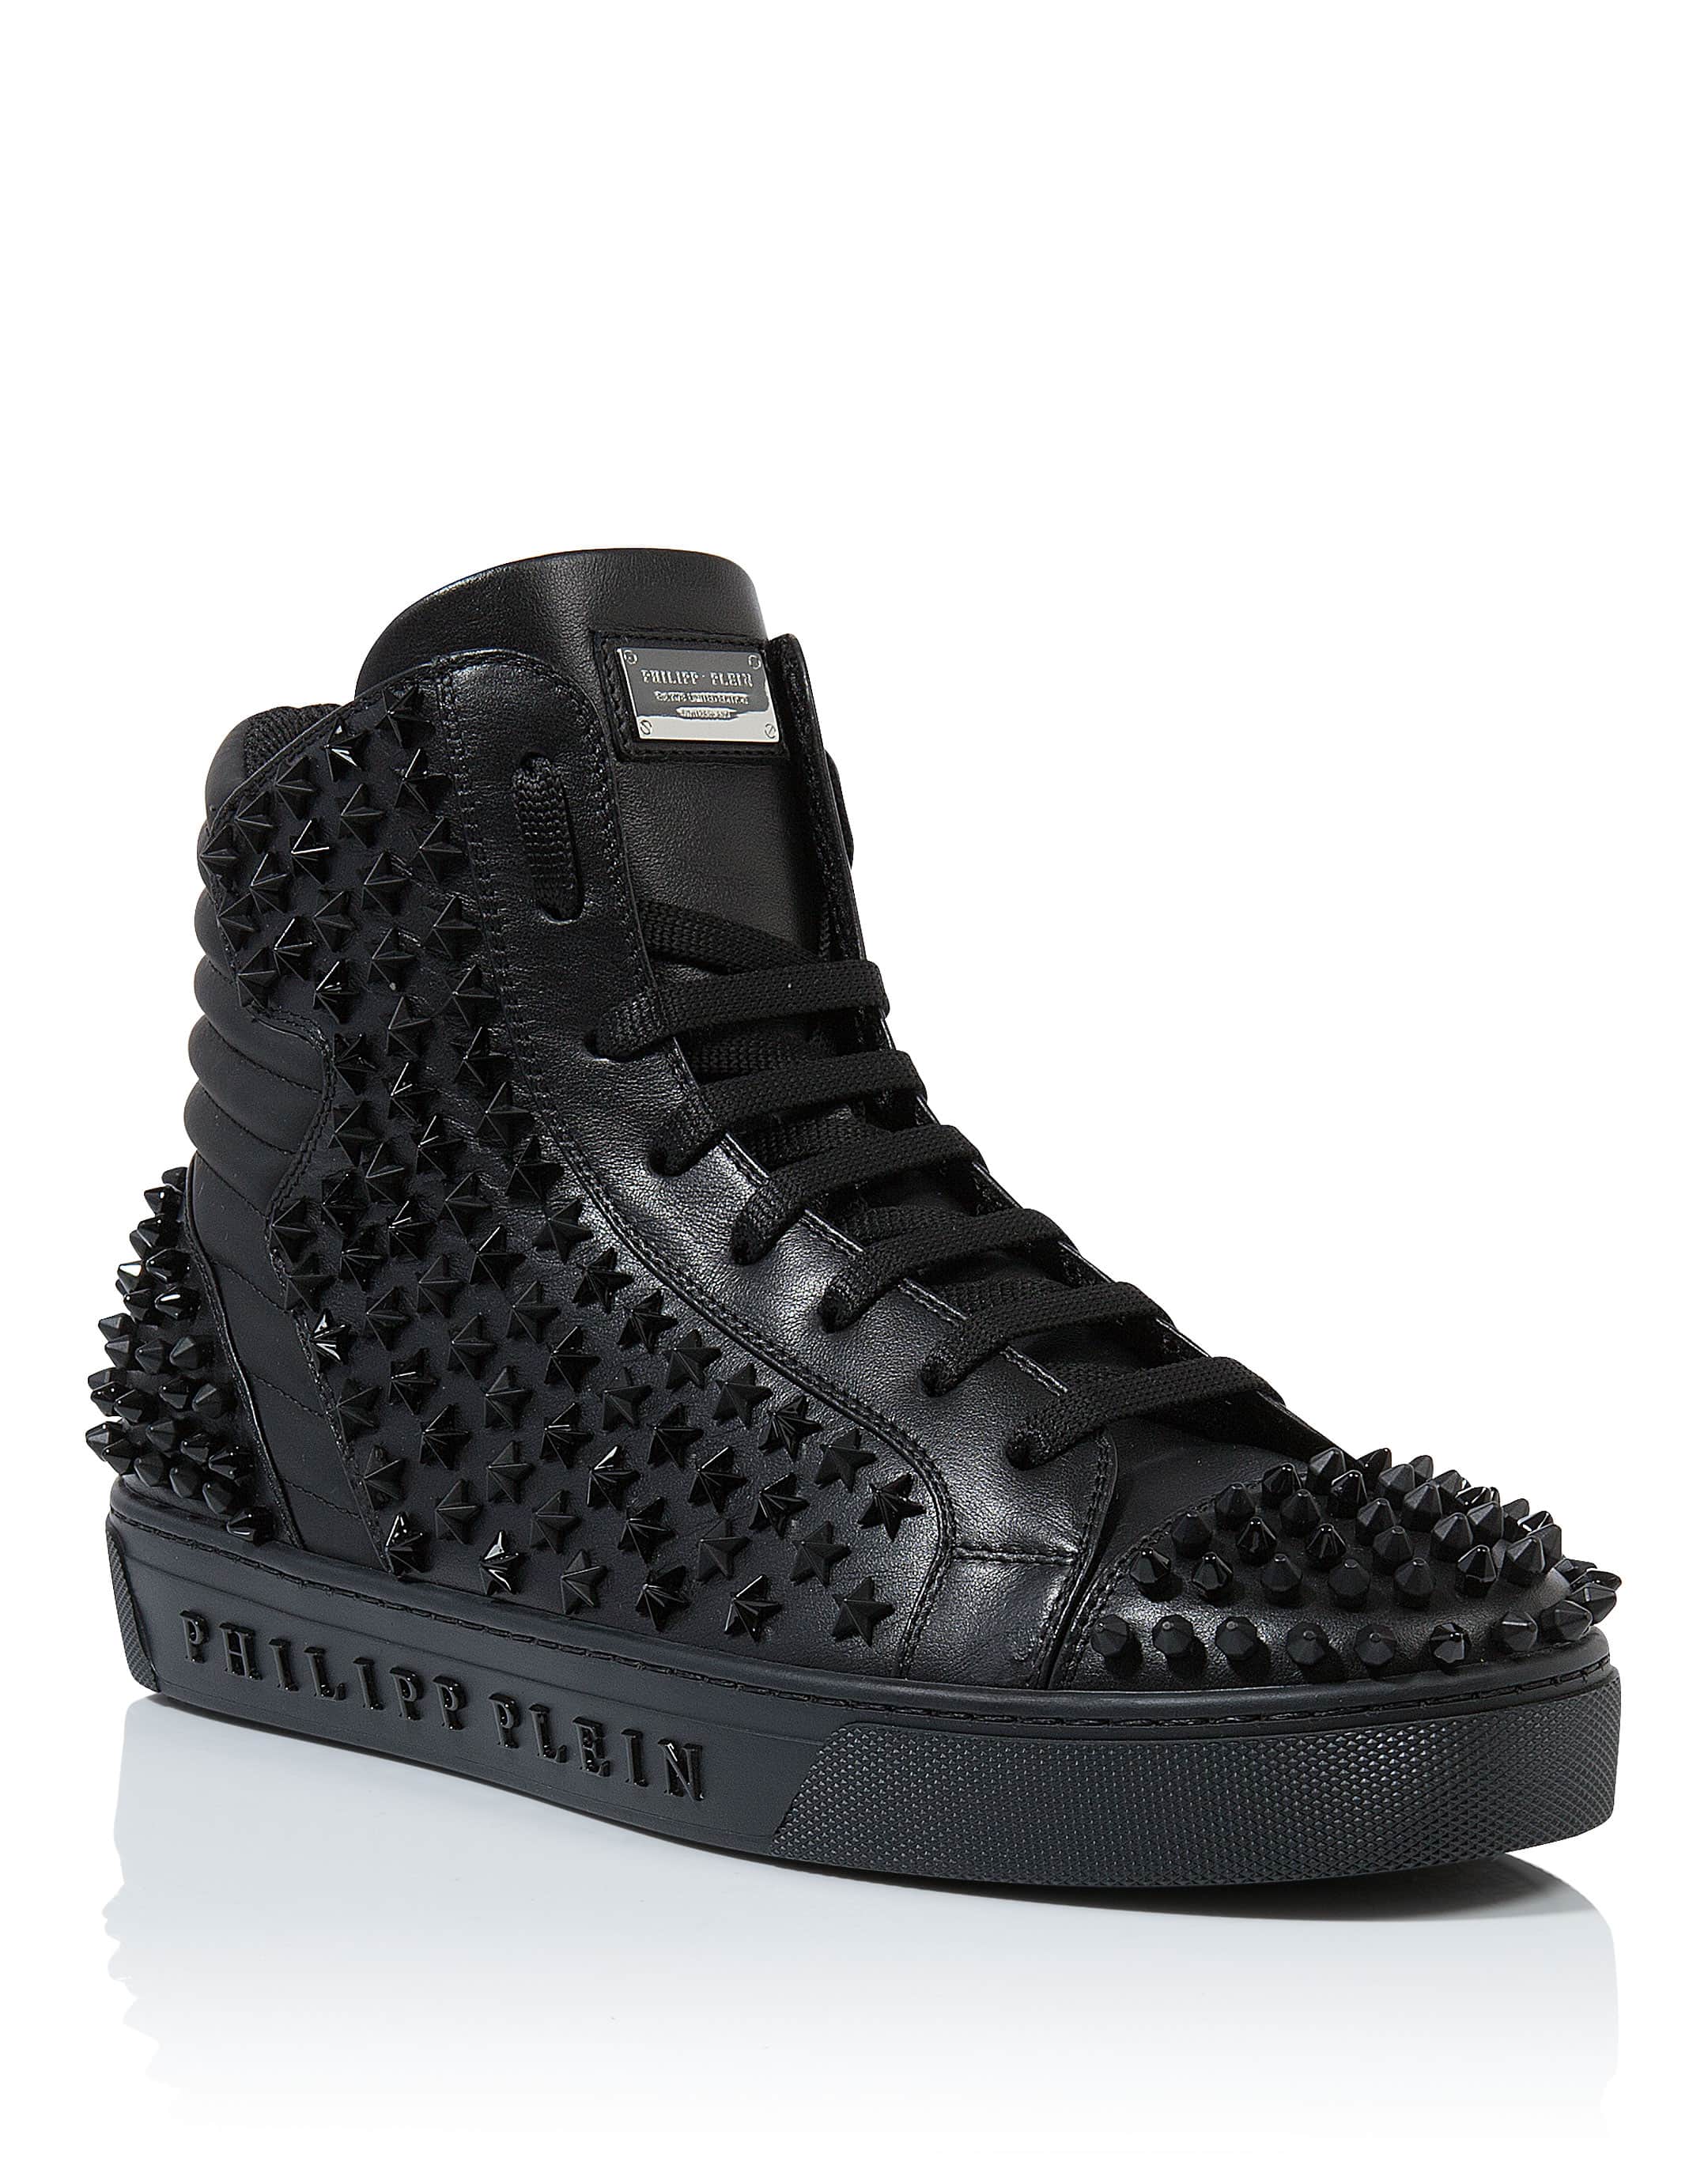 Hi-Top Sneakers "burning together" | Philipp Plein Outlet